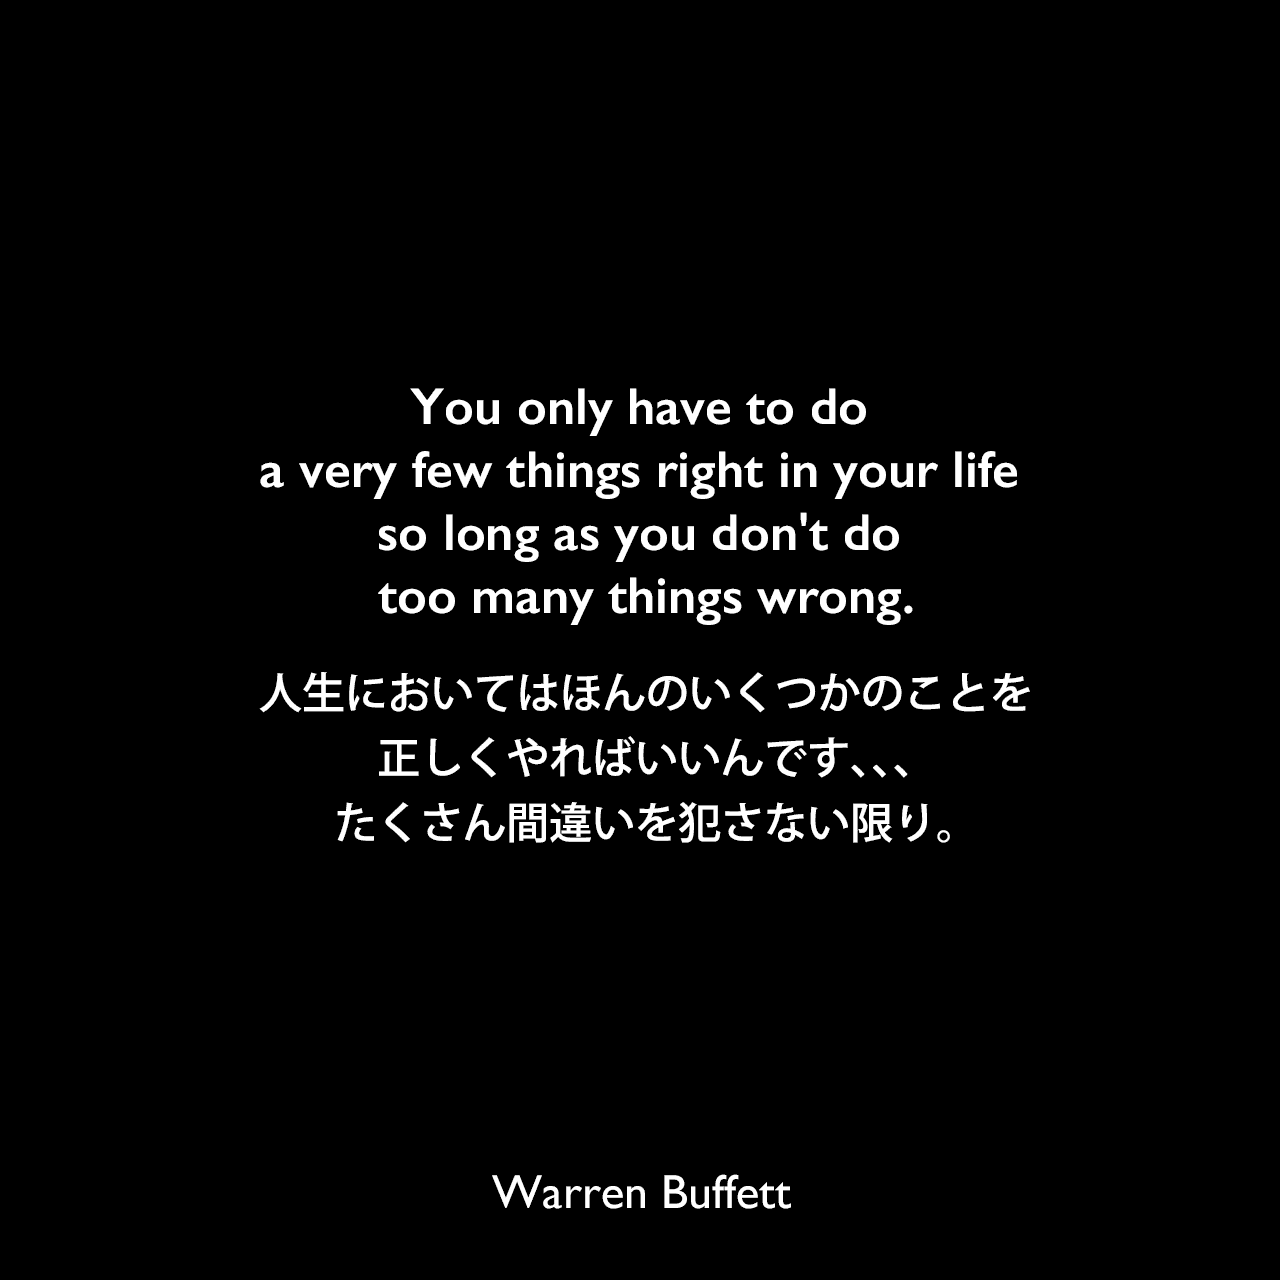 You only have to do a very few things right in your life so long as you don't do too many things wrong.人生においてはほんのいくつかのことを正しくやればいいんです、、、たくさん間違いを犯さない限り。Warren Buffett